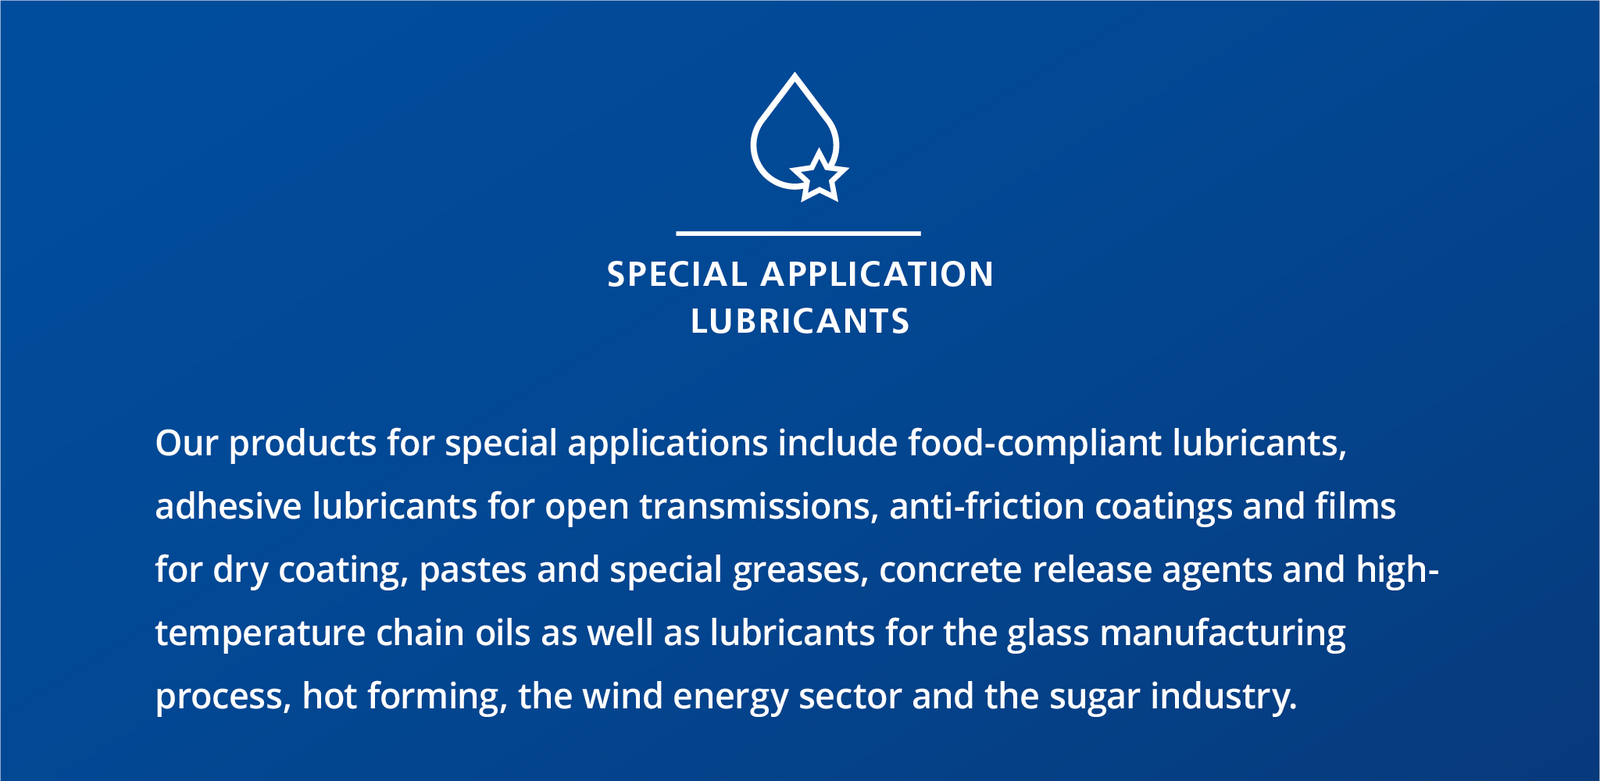 Blue information box explaining the special application lubricants sector of FUCHS.